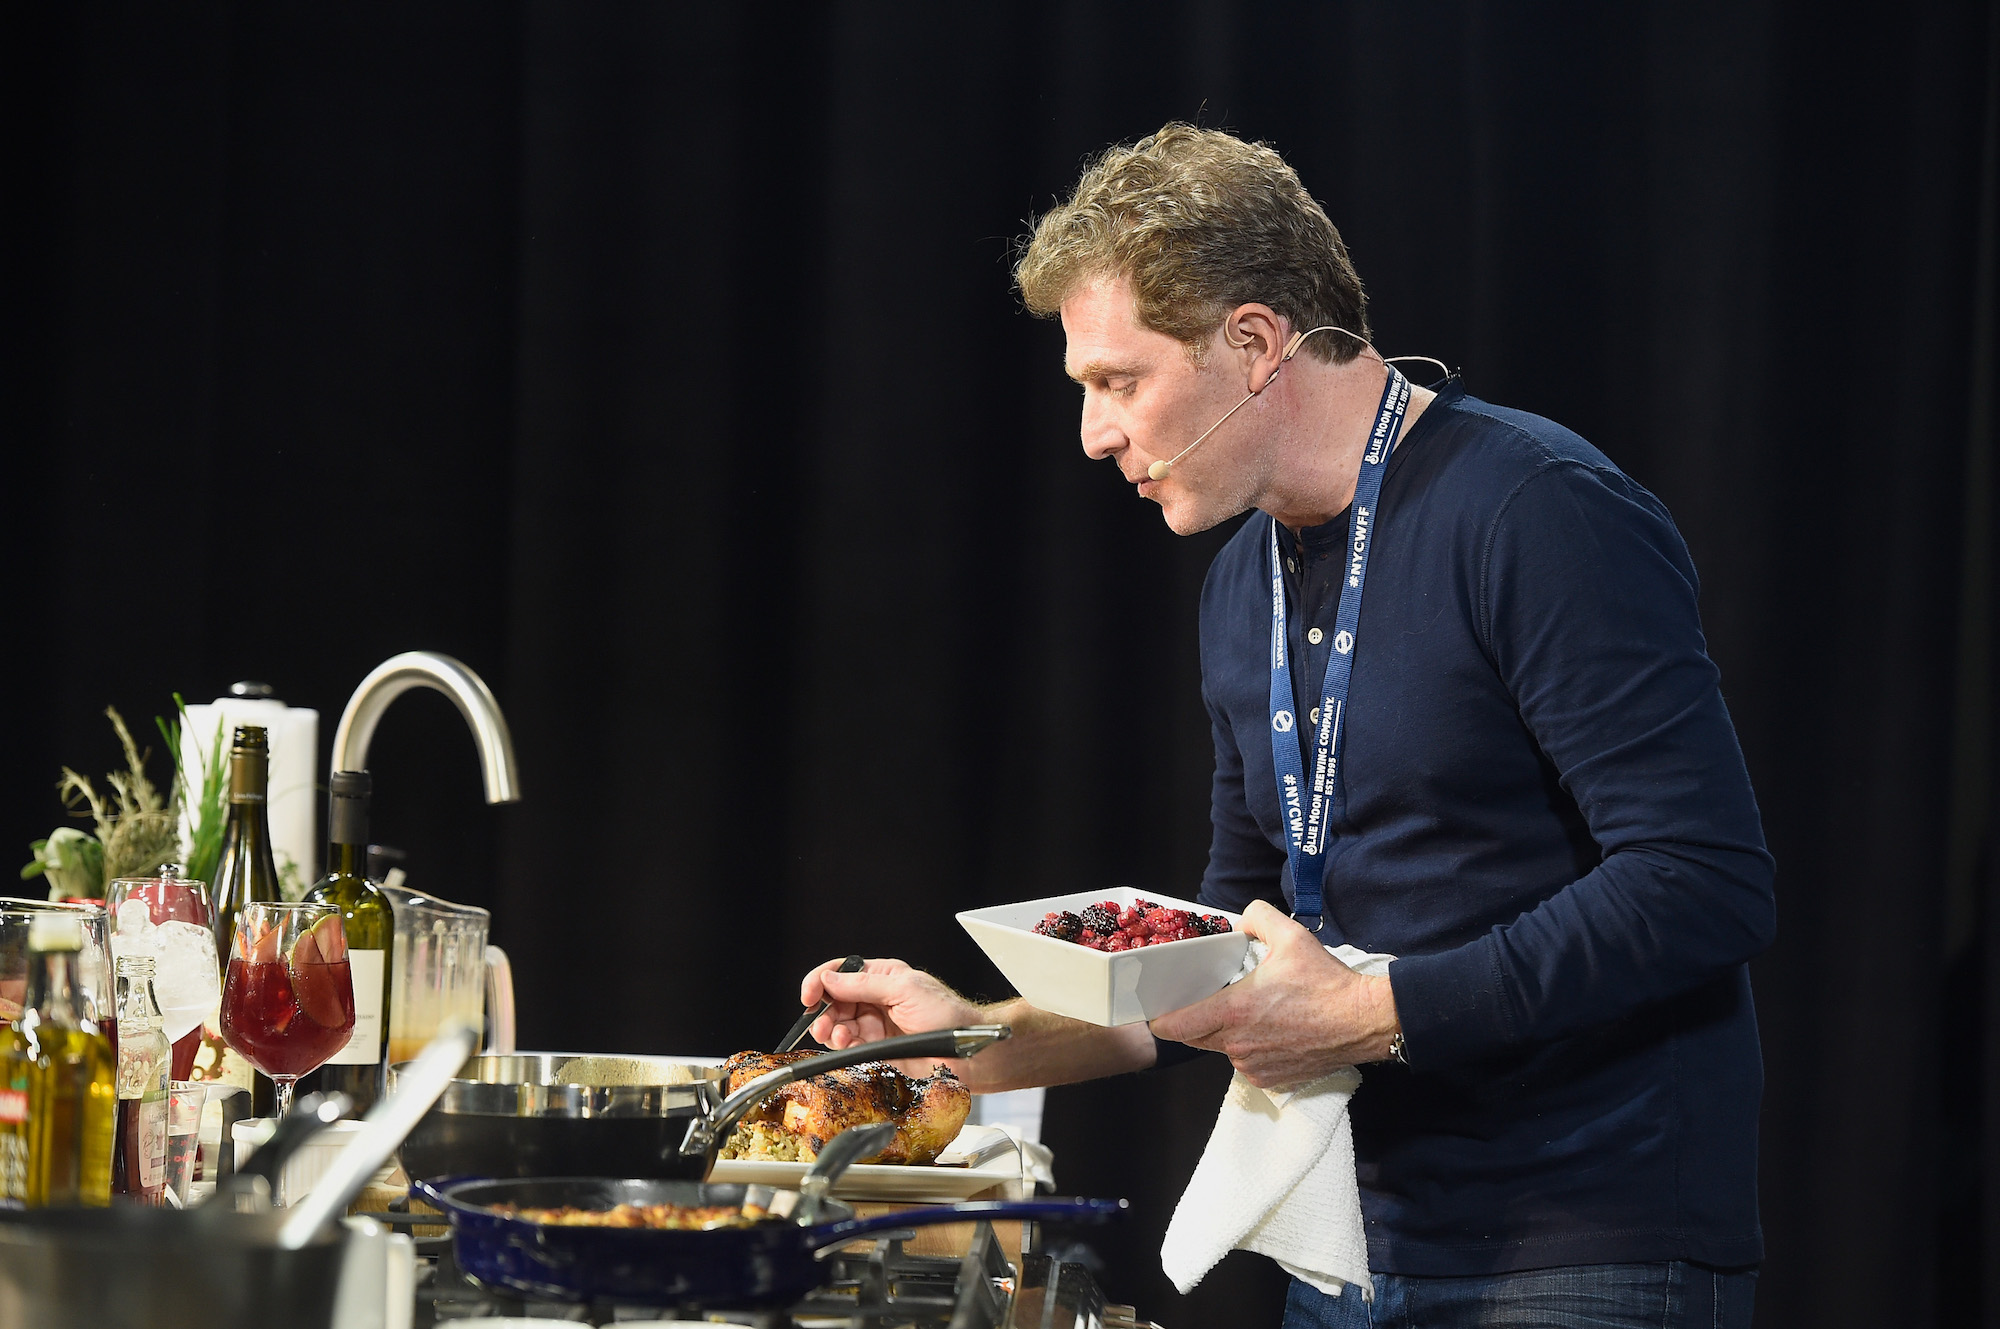 Bobby Flay cooks onstage